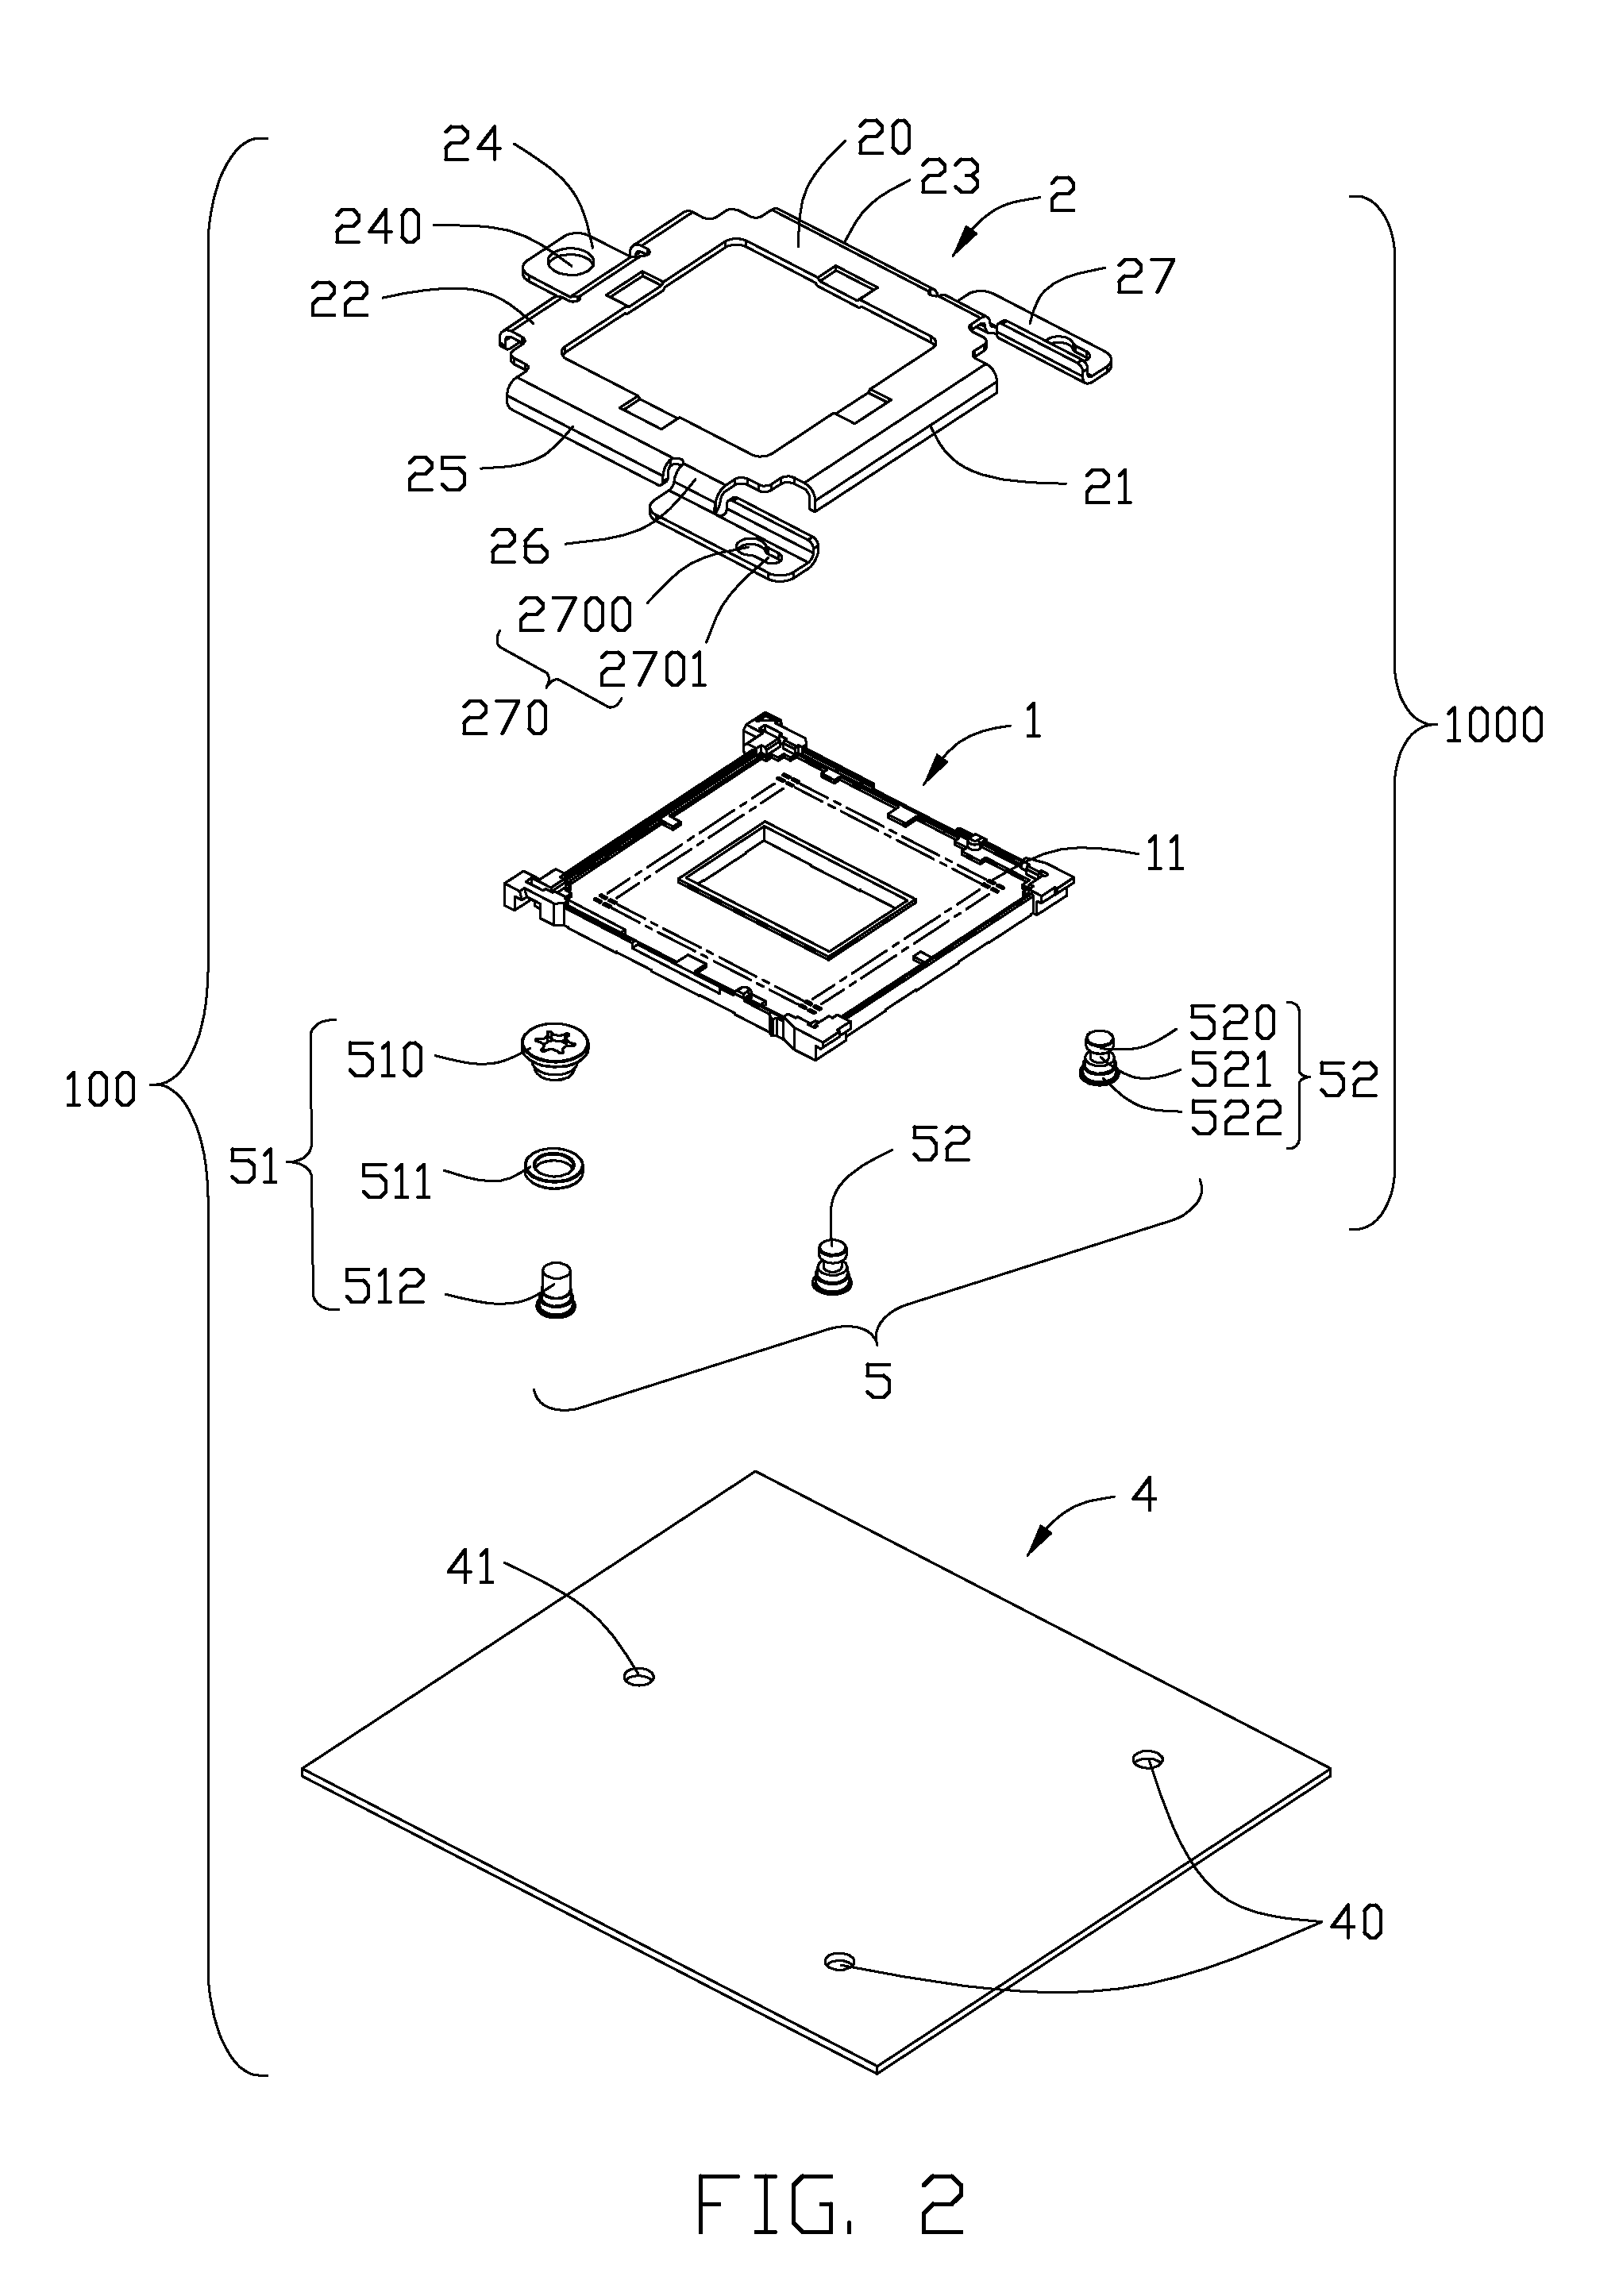 Individual loading mechanism with simplified locking arrangement